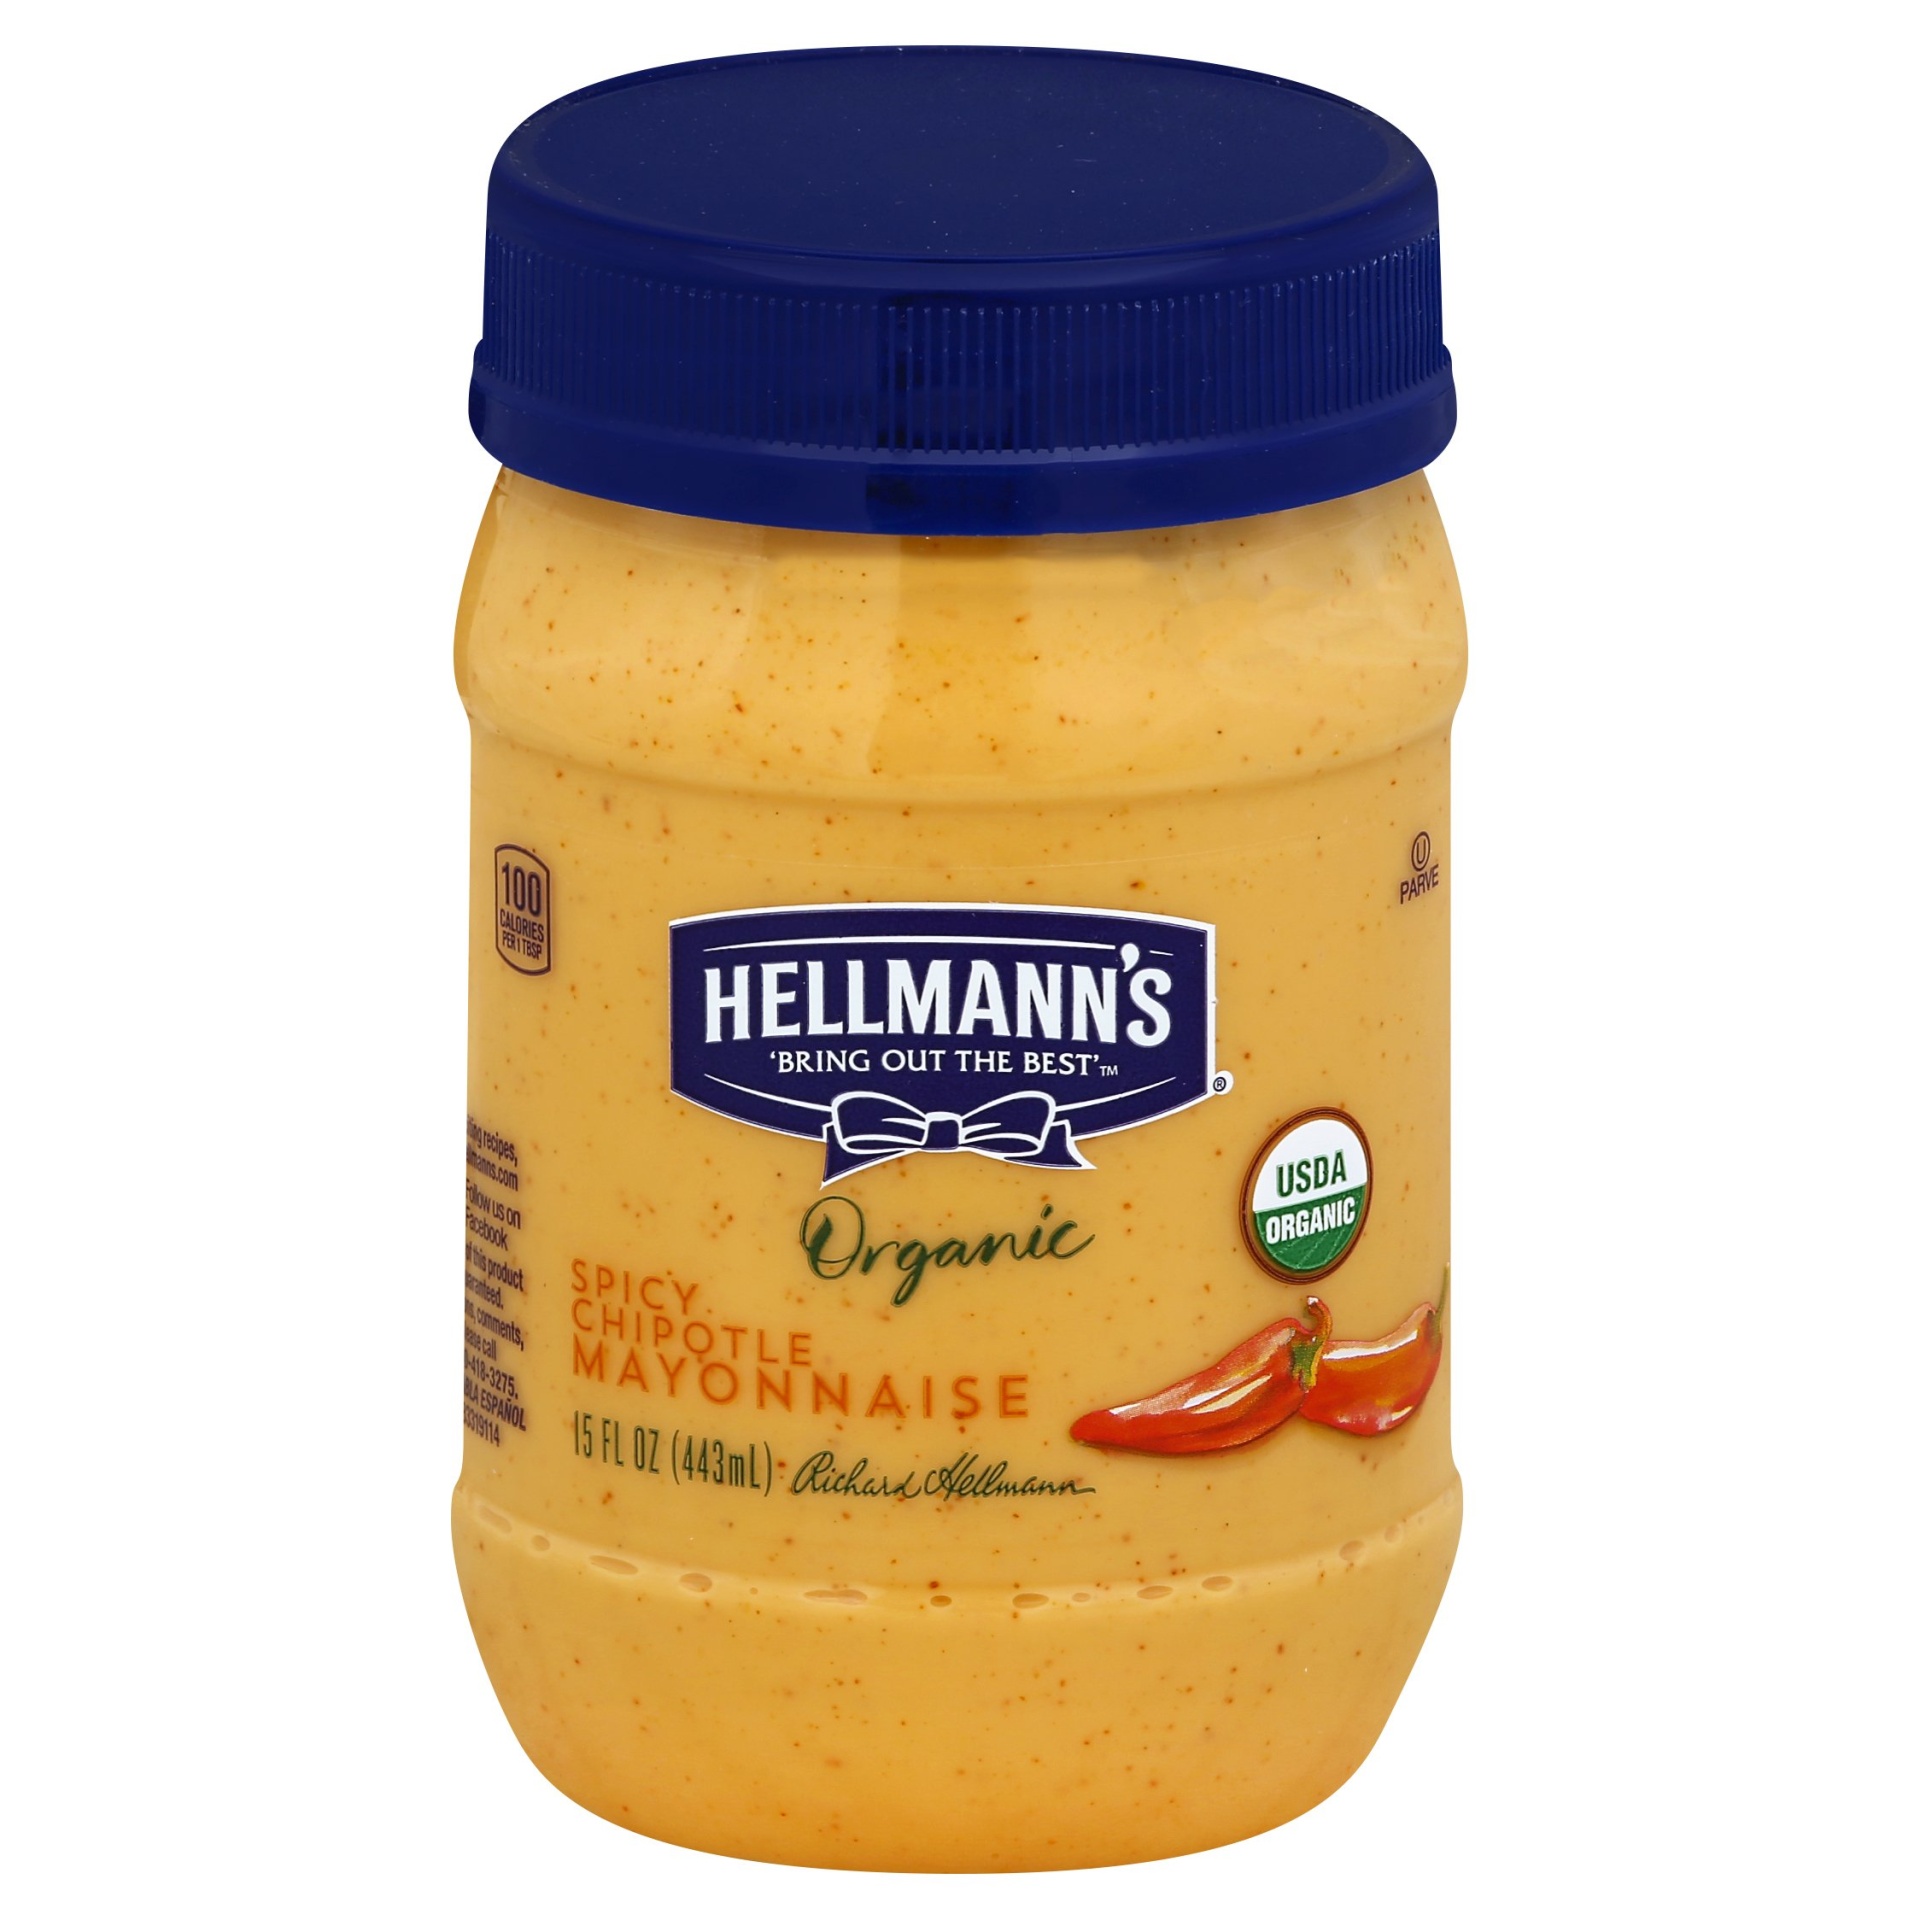 slide 1 of 1, Hellmann's Organic Spicy Chipotle Mayonnaise, 15 oz